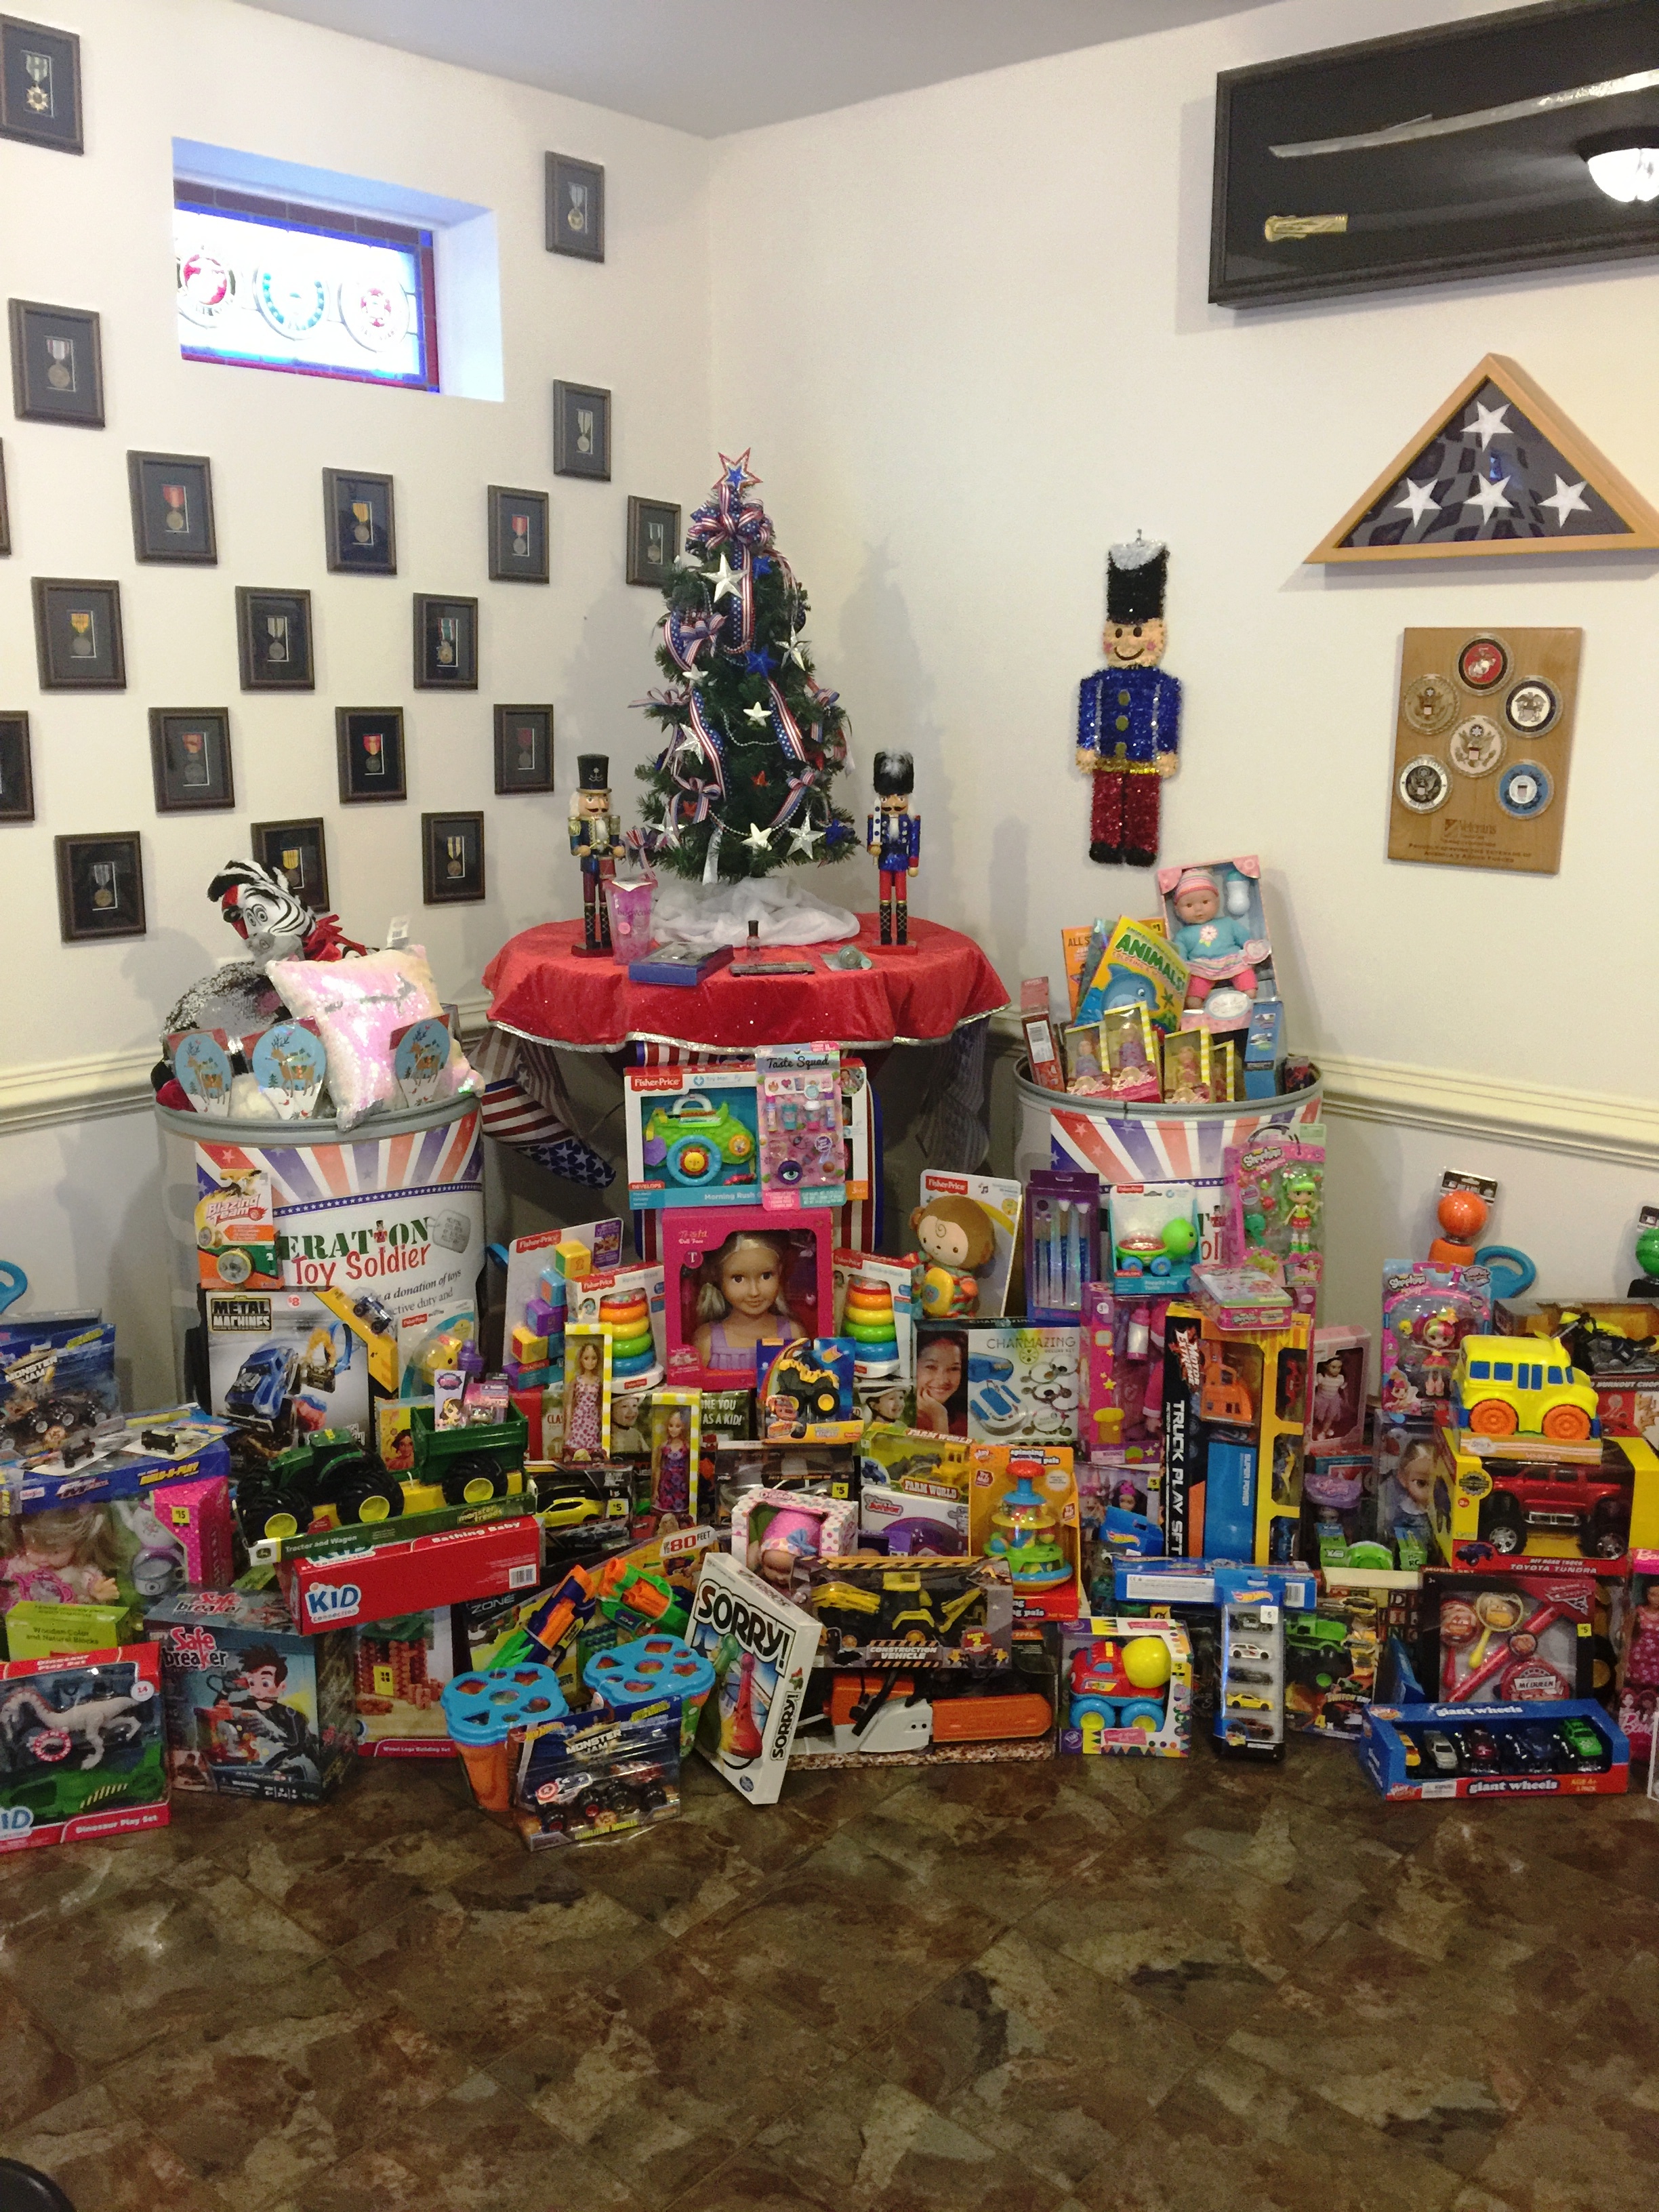 Twiford Funeral Homes donated toys overflowing the barrel